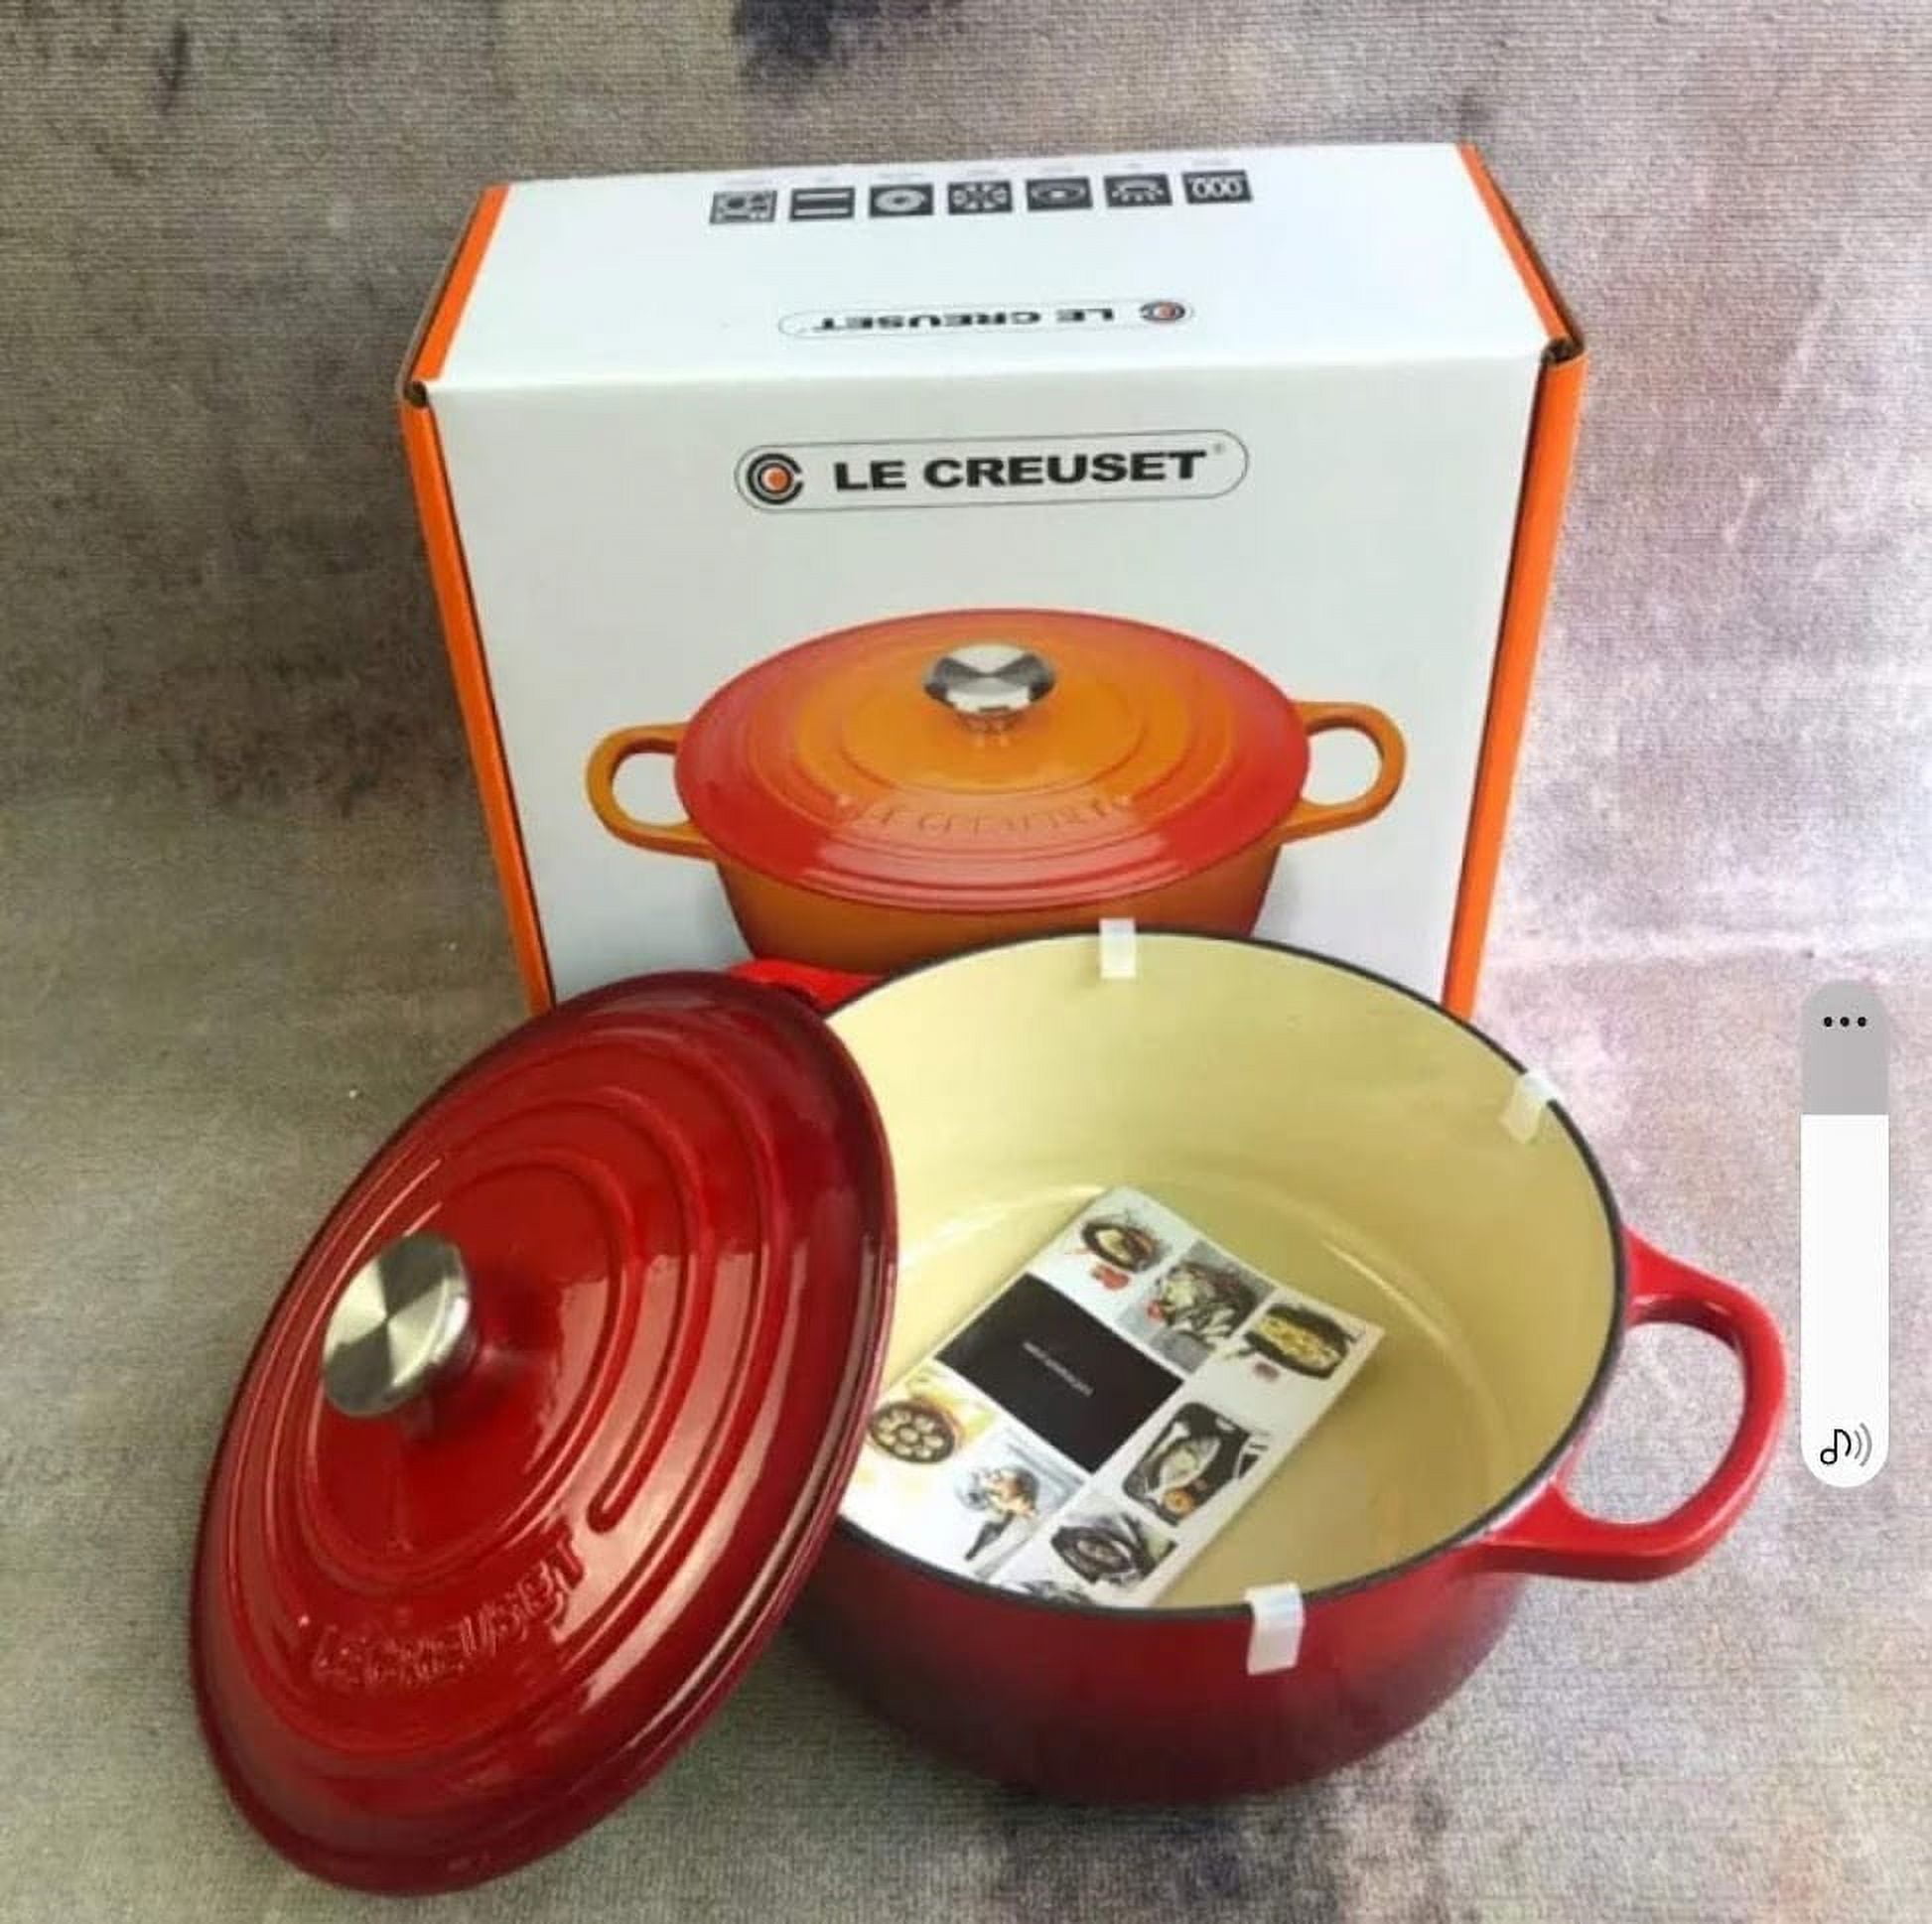 Le Creuset Enameled Cast Iron Round Oven, 4 1/2-Qt., Honeycomb in 2023